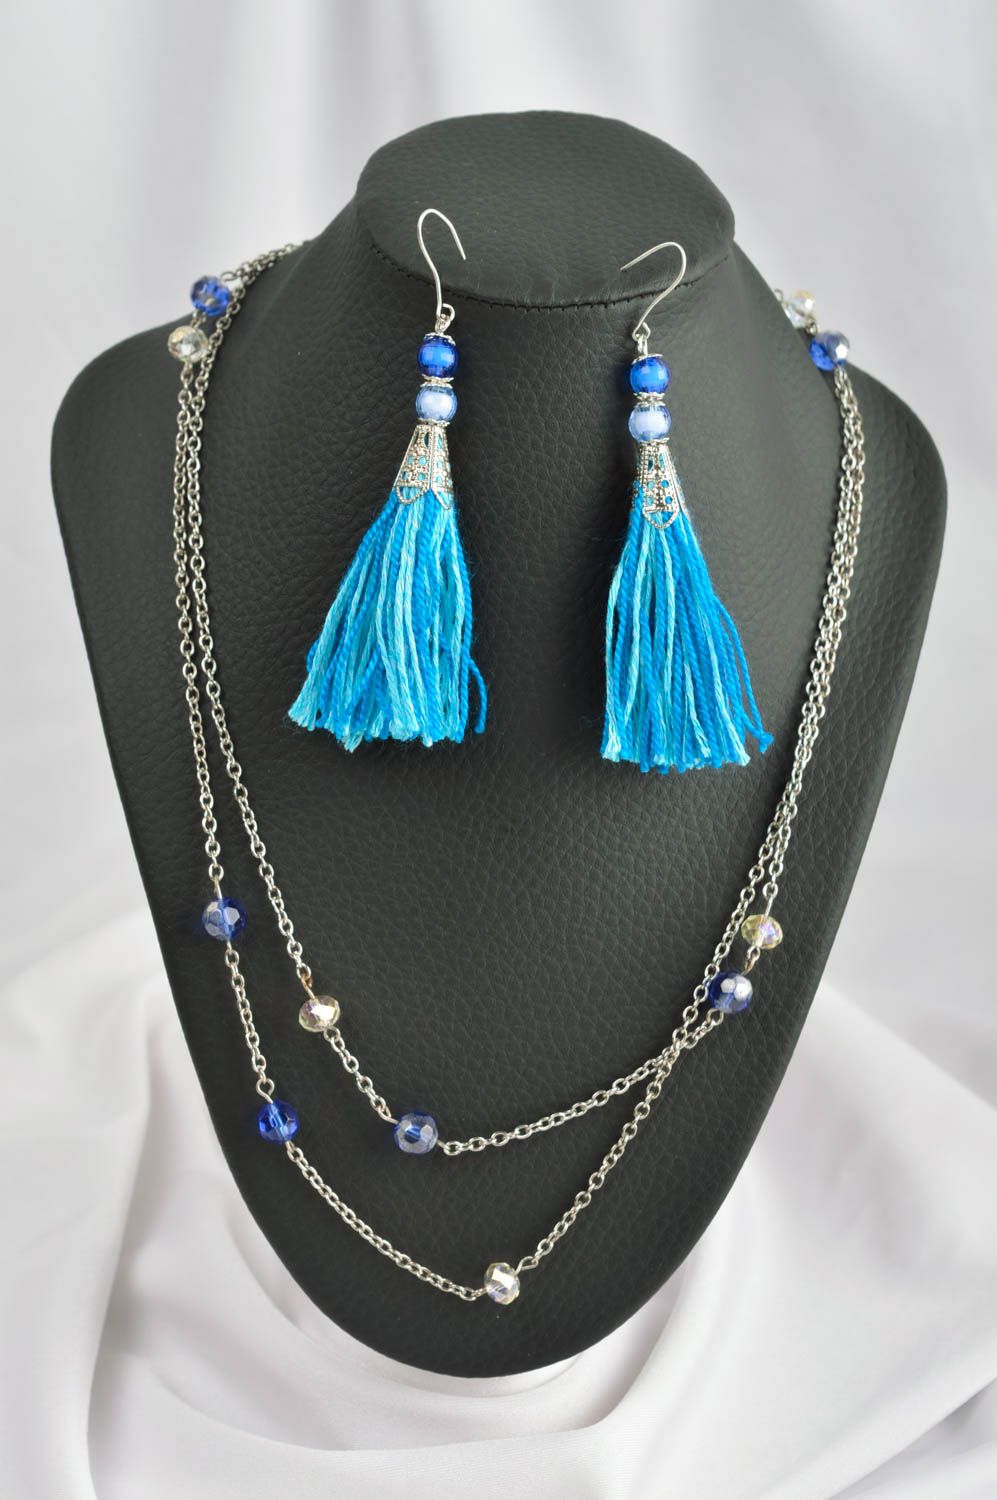 Unusual handmade metal necklace with beads textile tassel earrings gifts for her photo 1